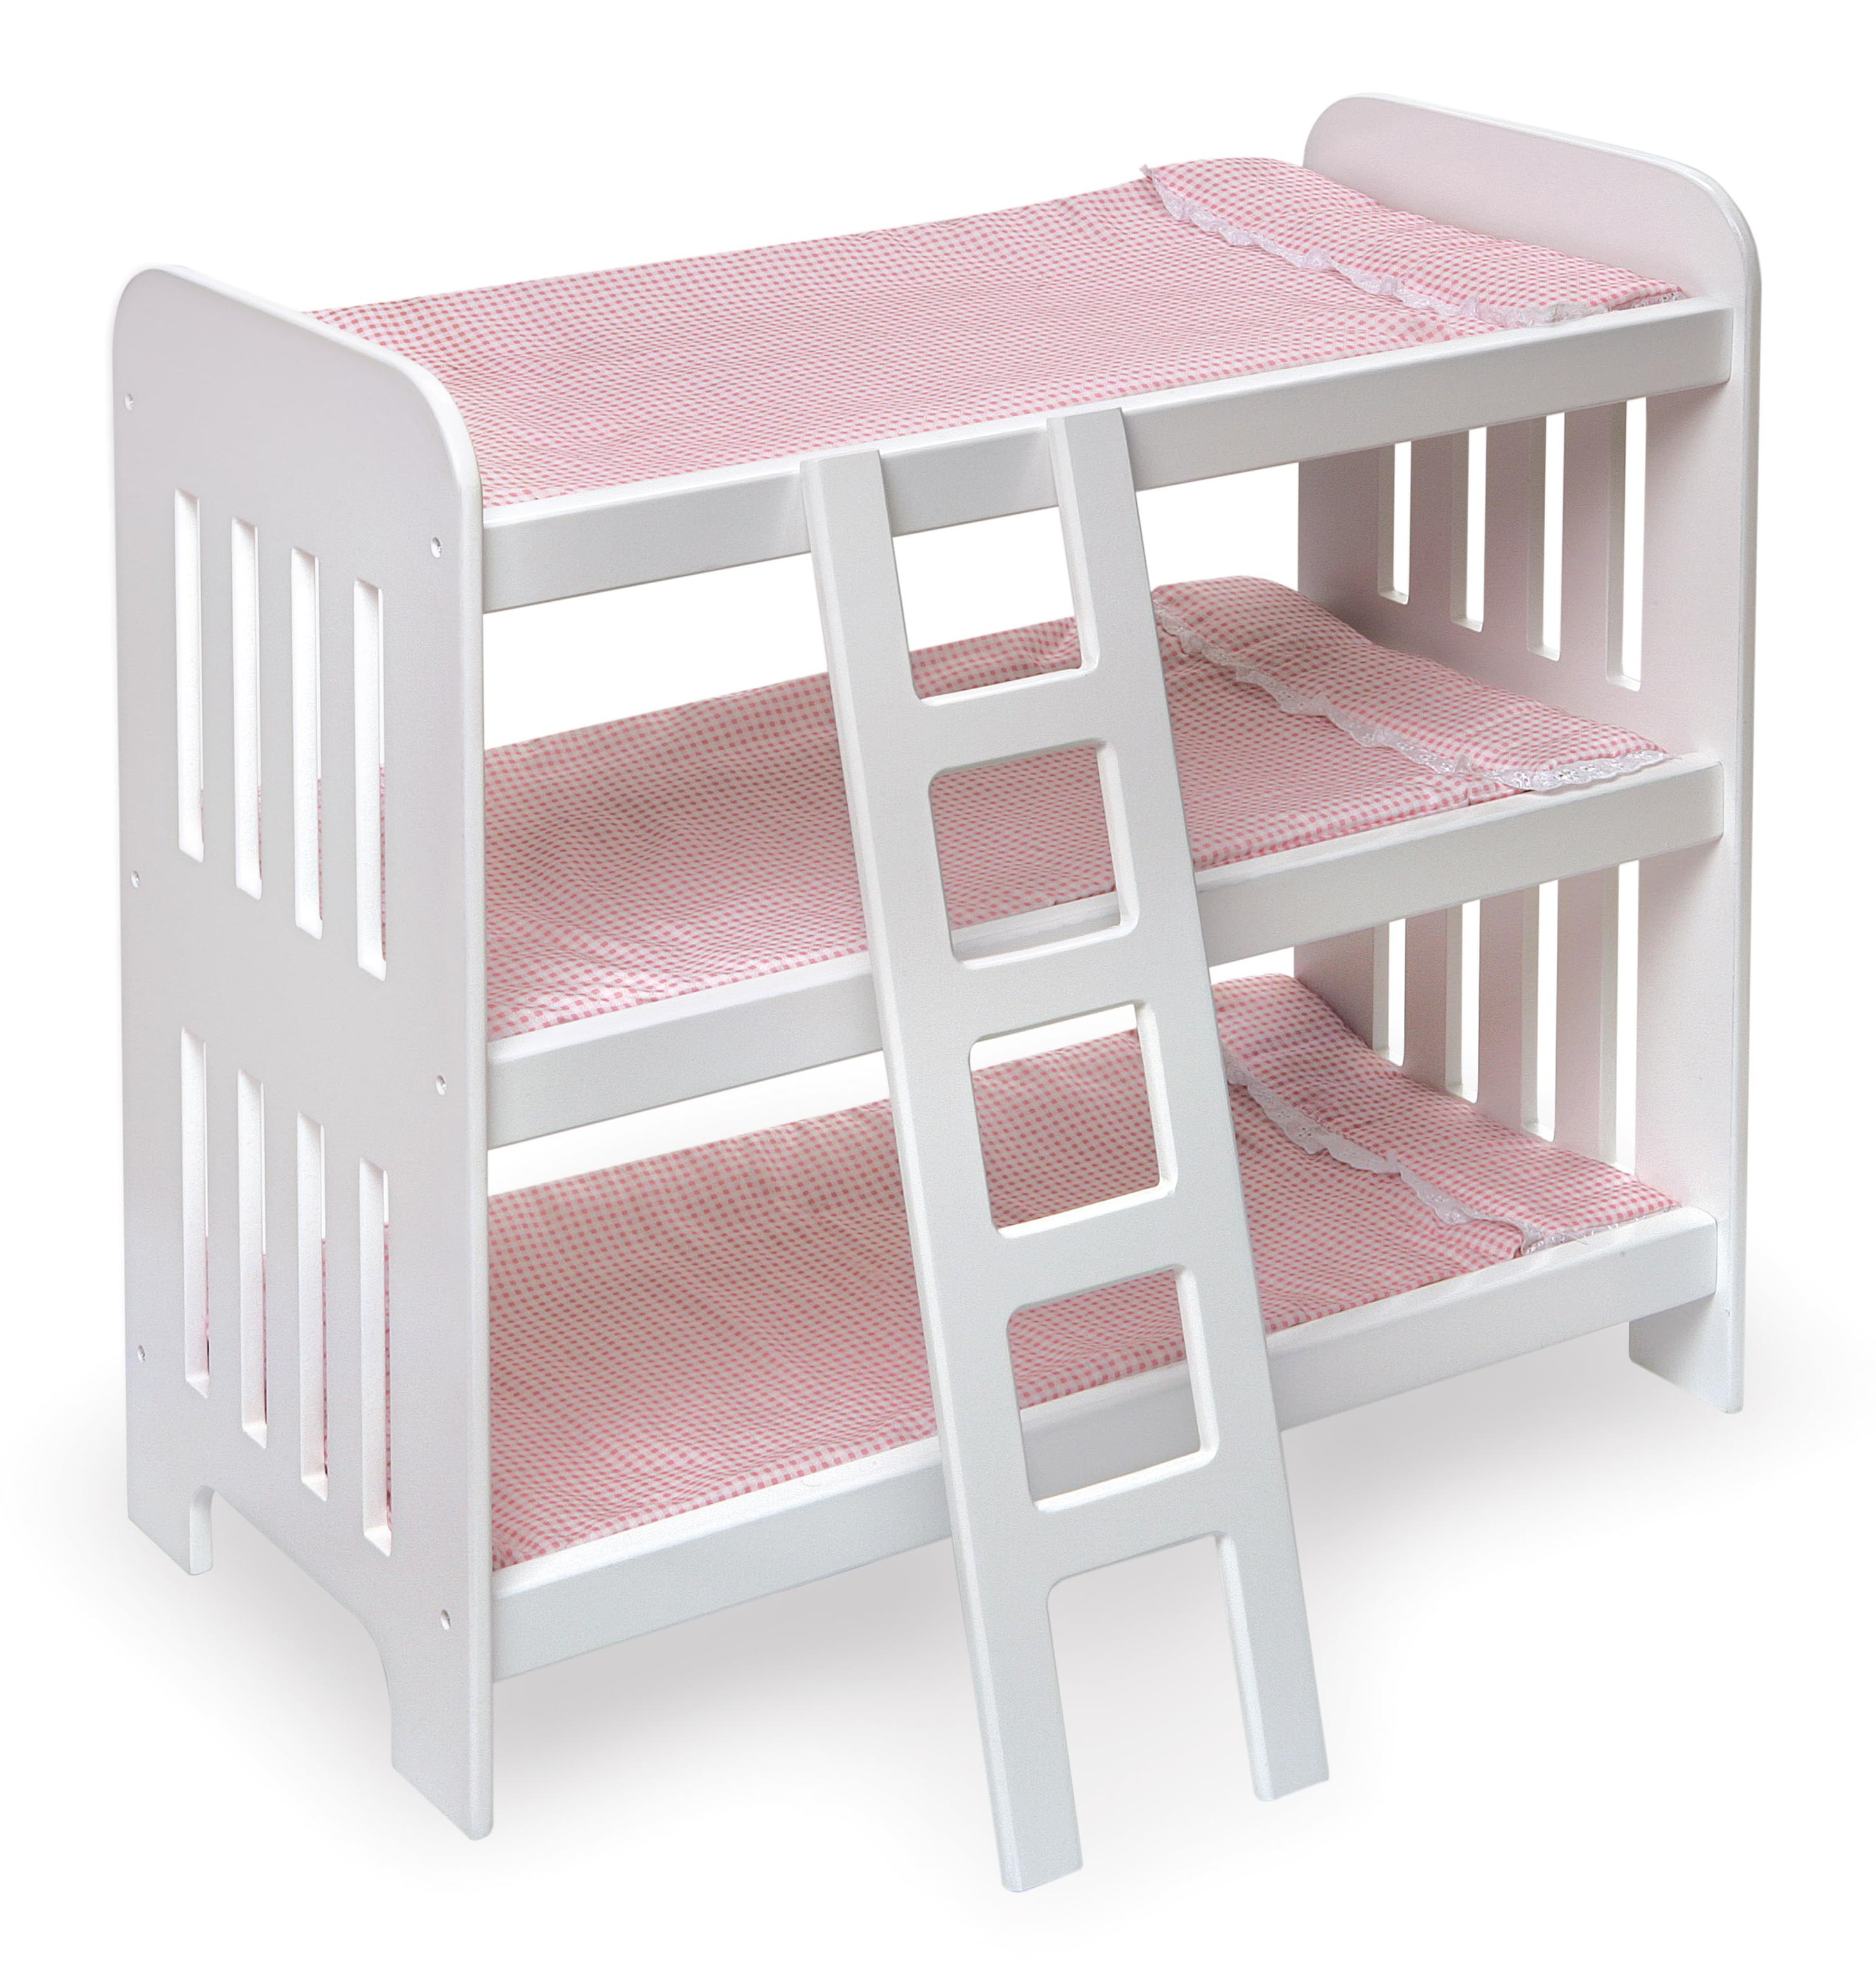 Badger Basket Trundle Doll Bunk Bed W, How To Make An American Girl Doll Bunk Bed Out Of Cardboard